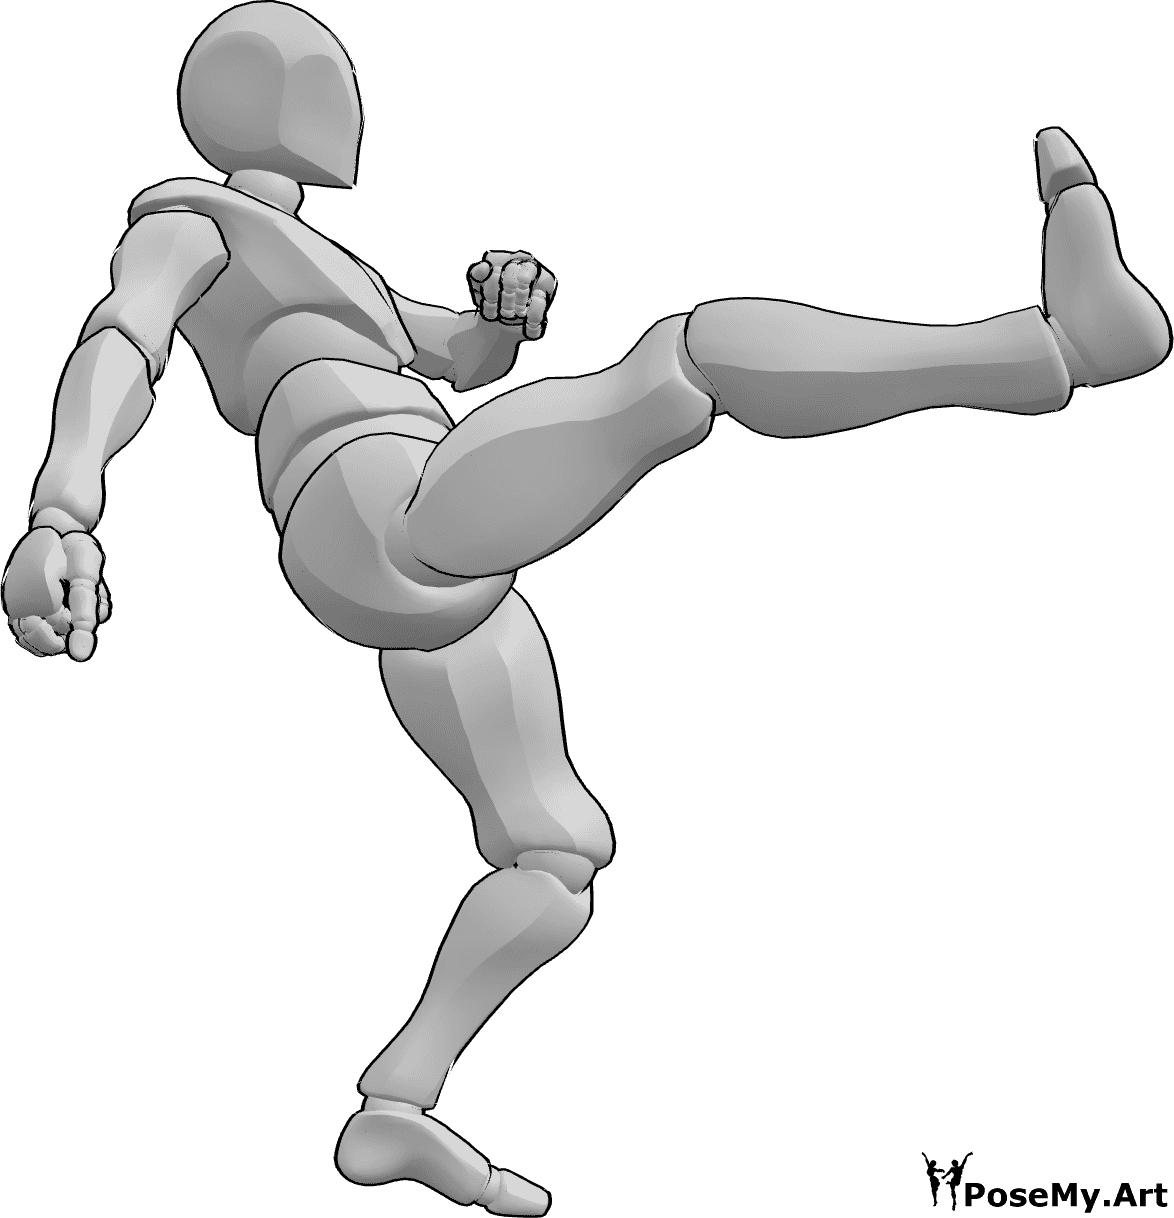 Pose Reference - High kicking pose - Male is kicking high with his right foot, while clenching his fists